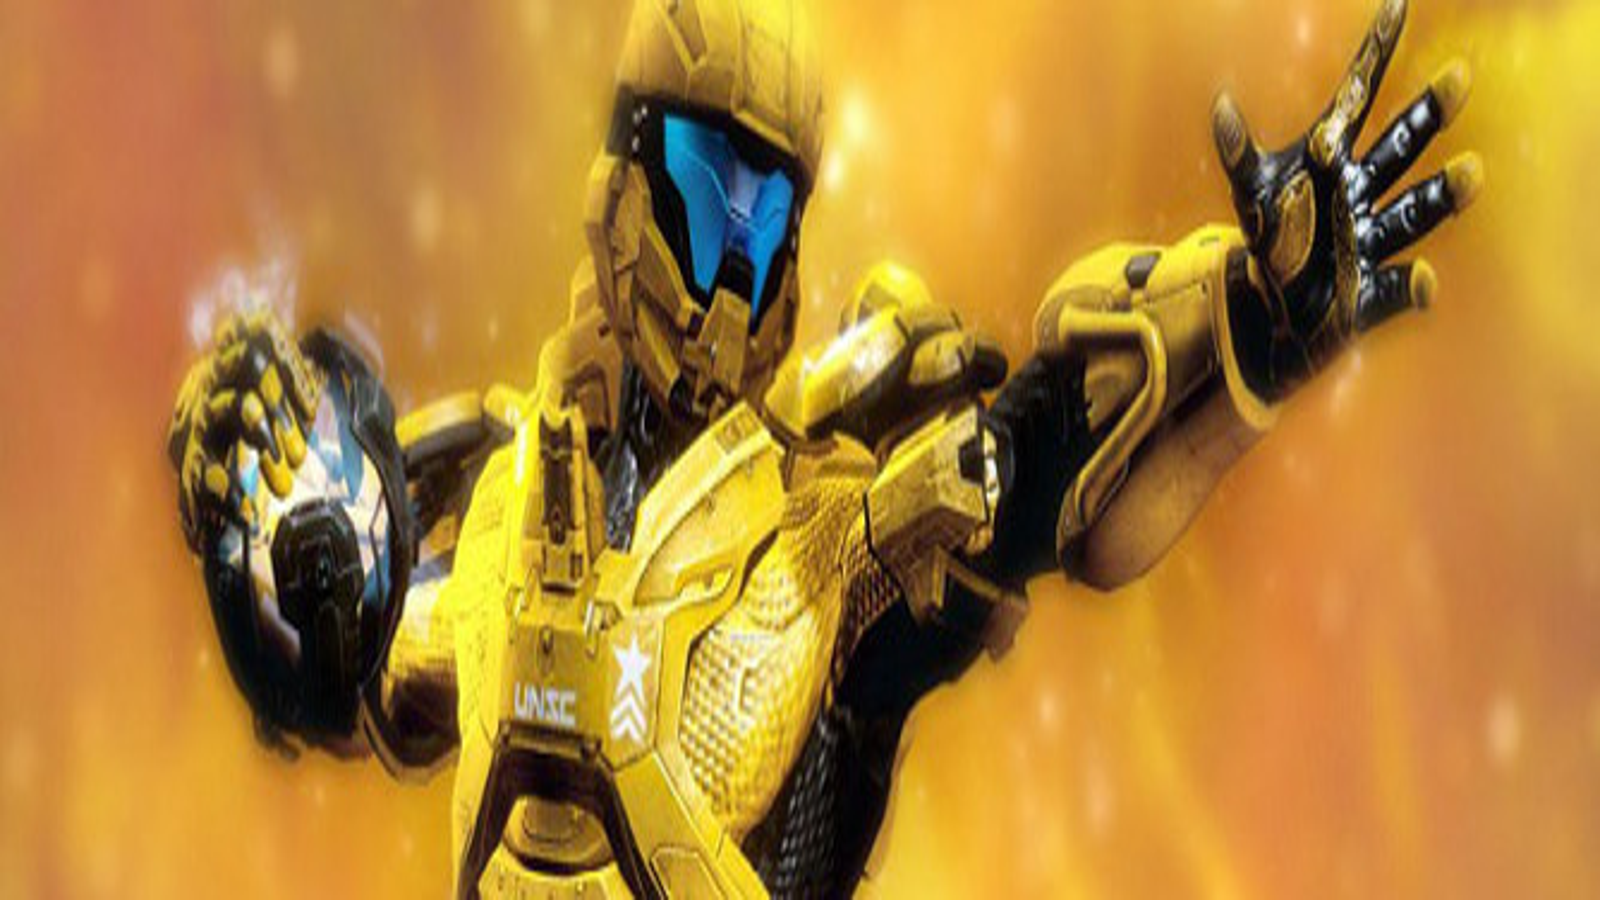 Halo 4 Spartan Ops Season One Returns with 5 New Episodes